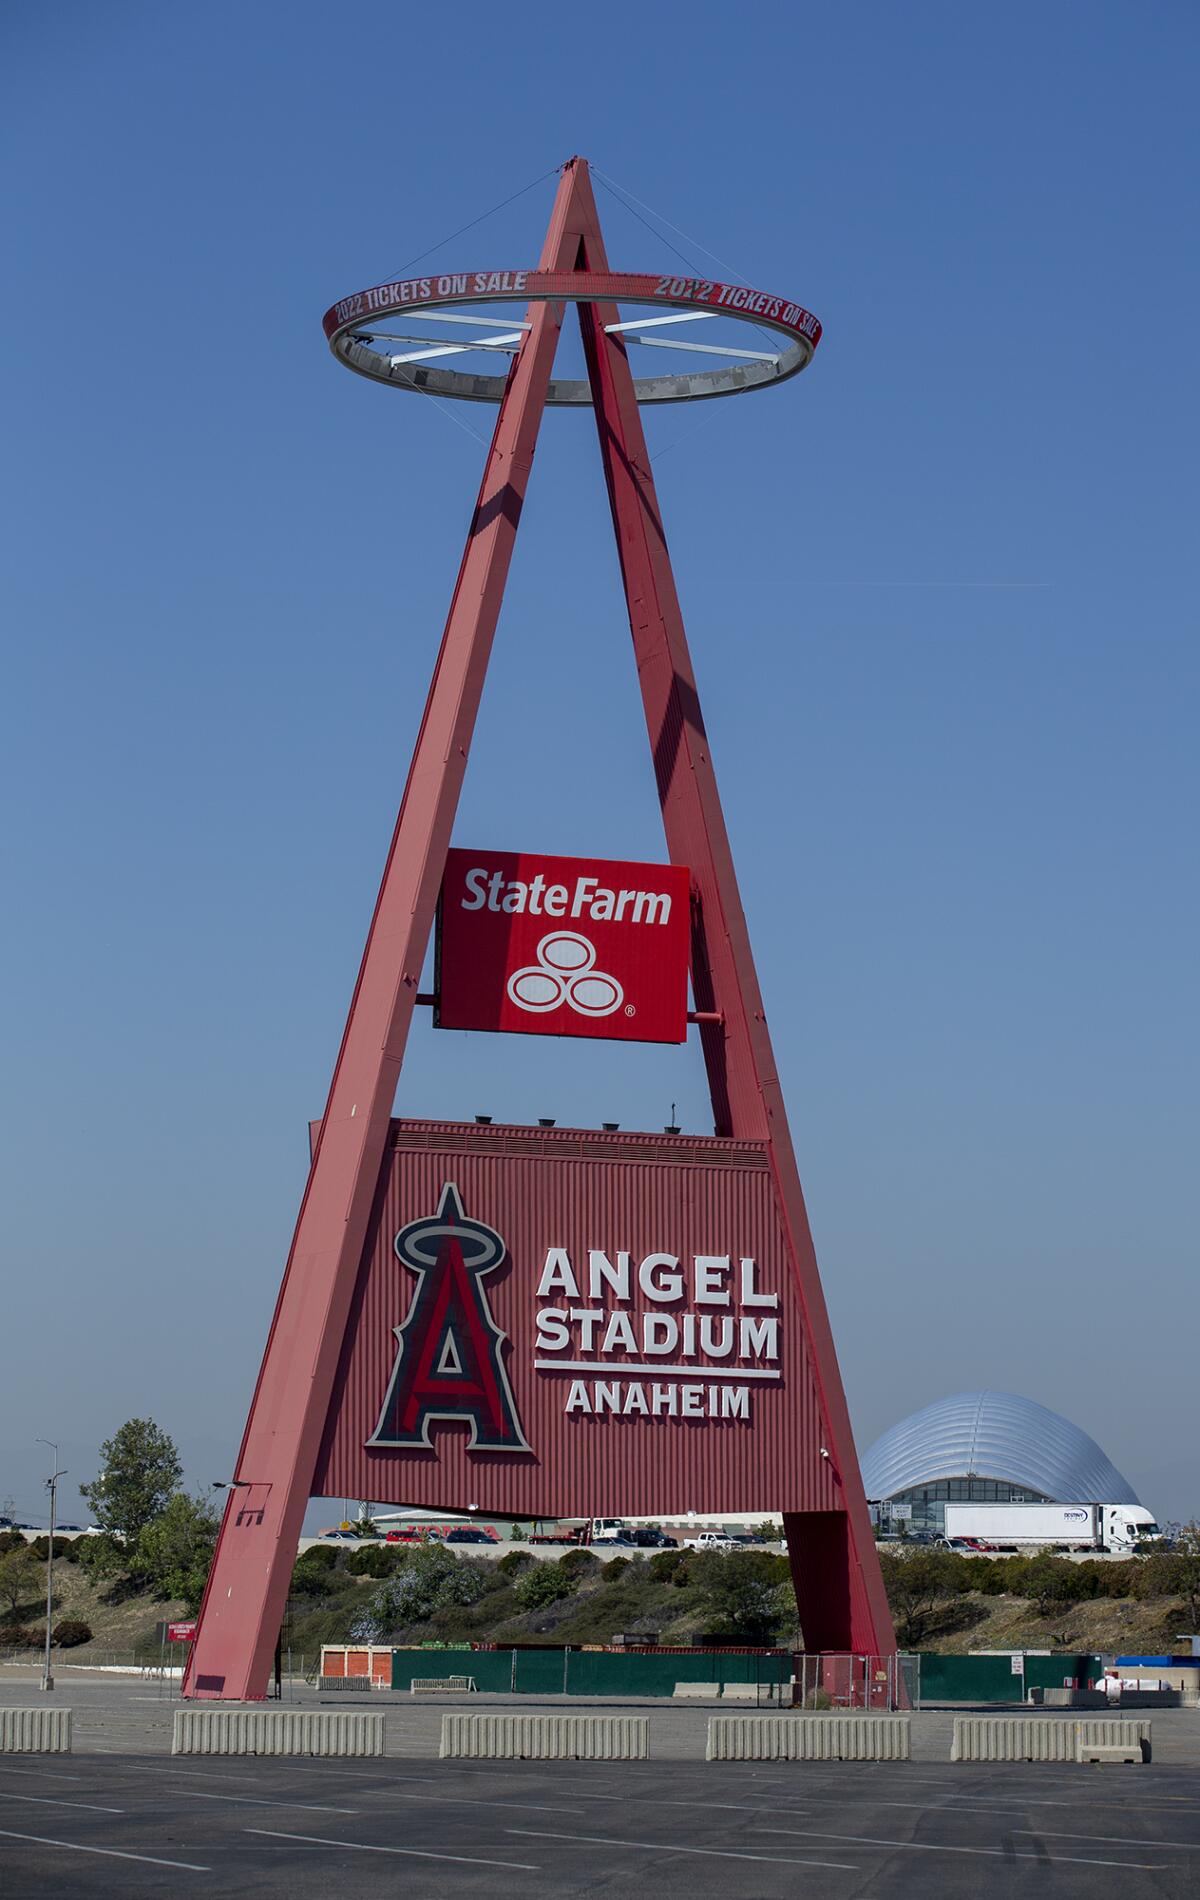 The "Big A" at Angel Stadium in Anaheim with ARTIC in the backdrop.